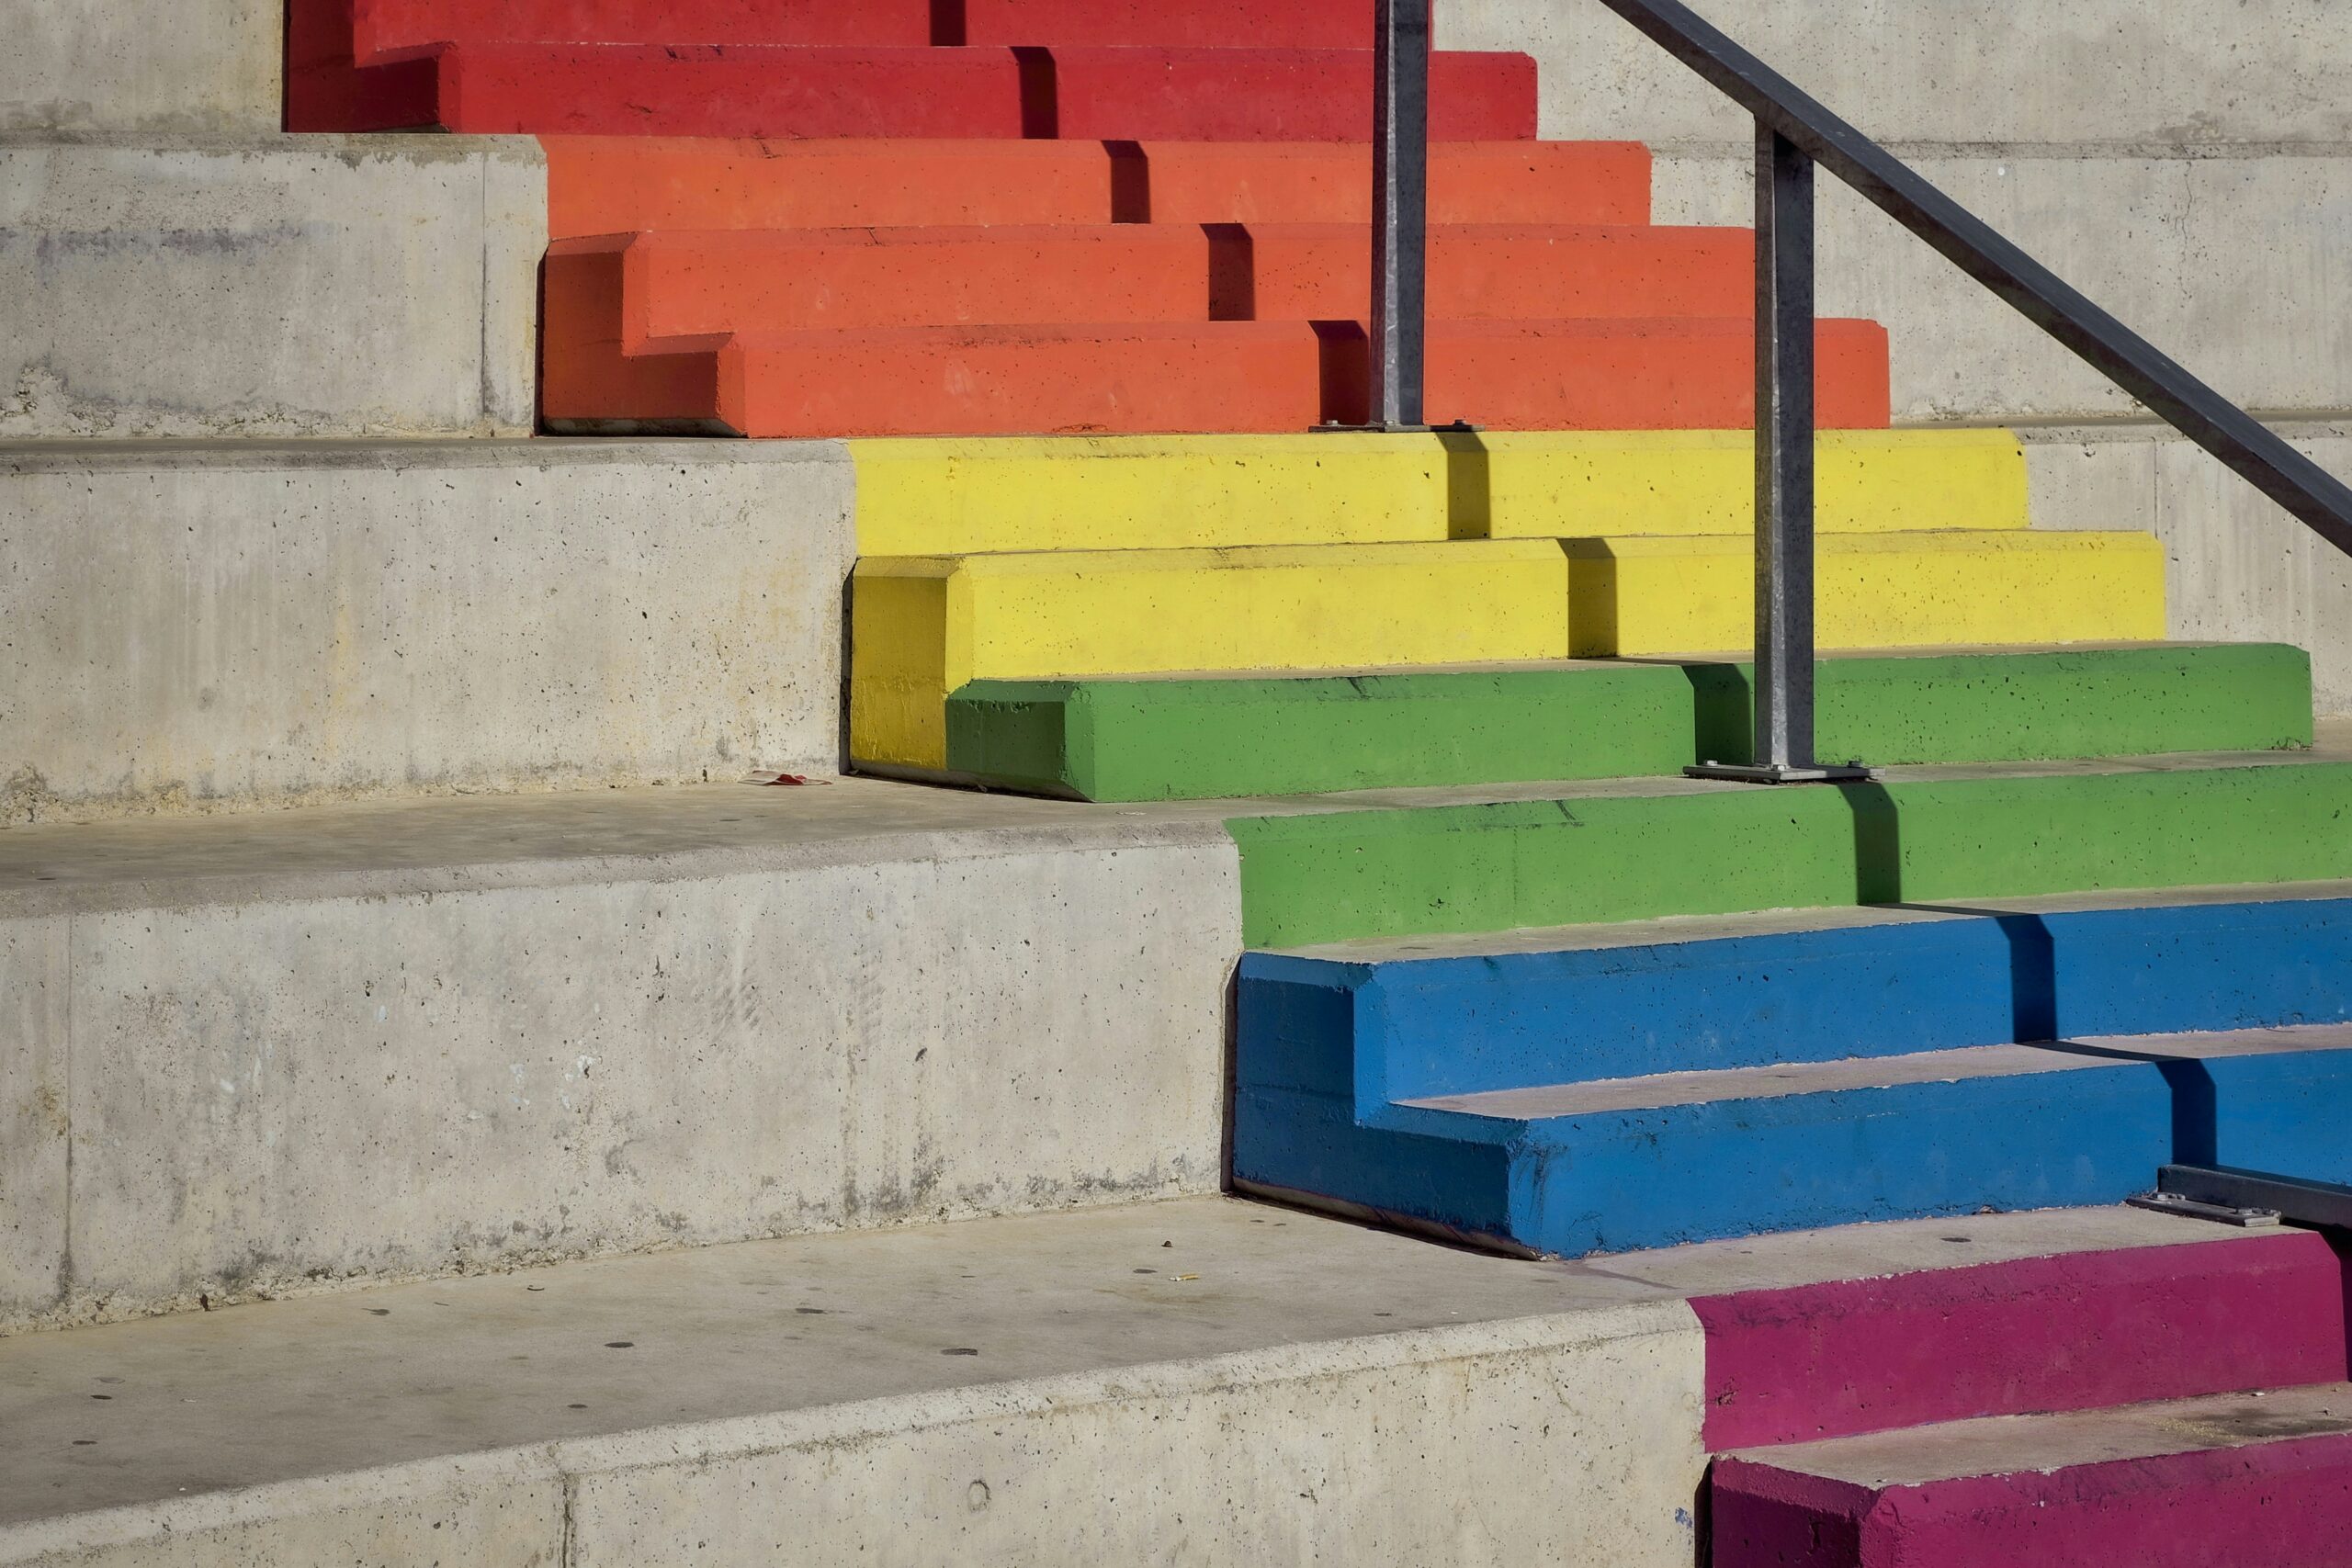 Stairs painted with rainbow colors.